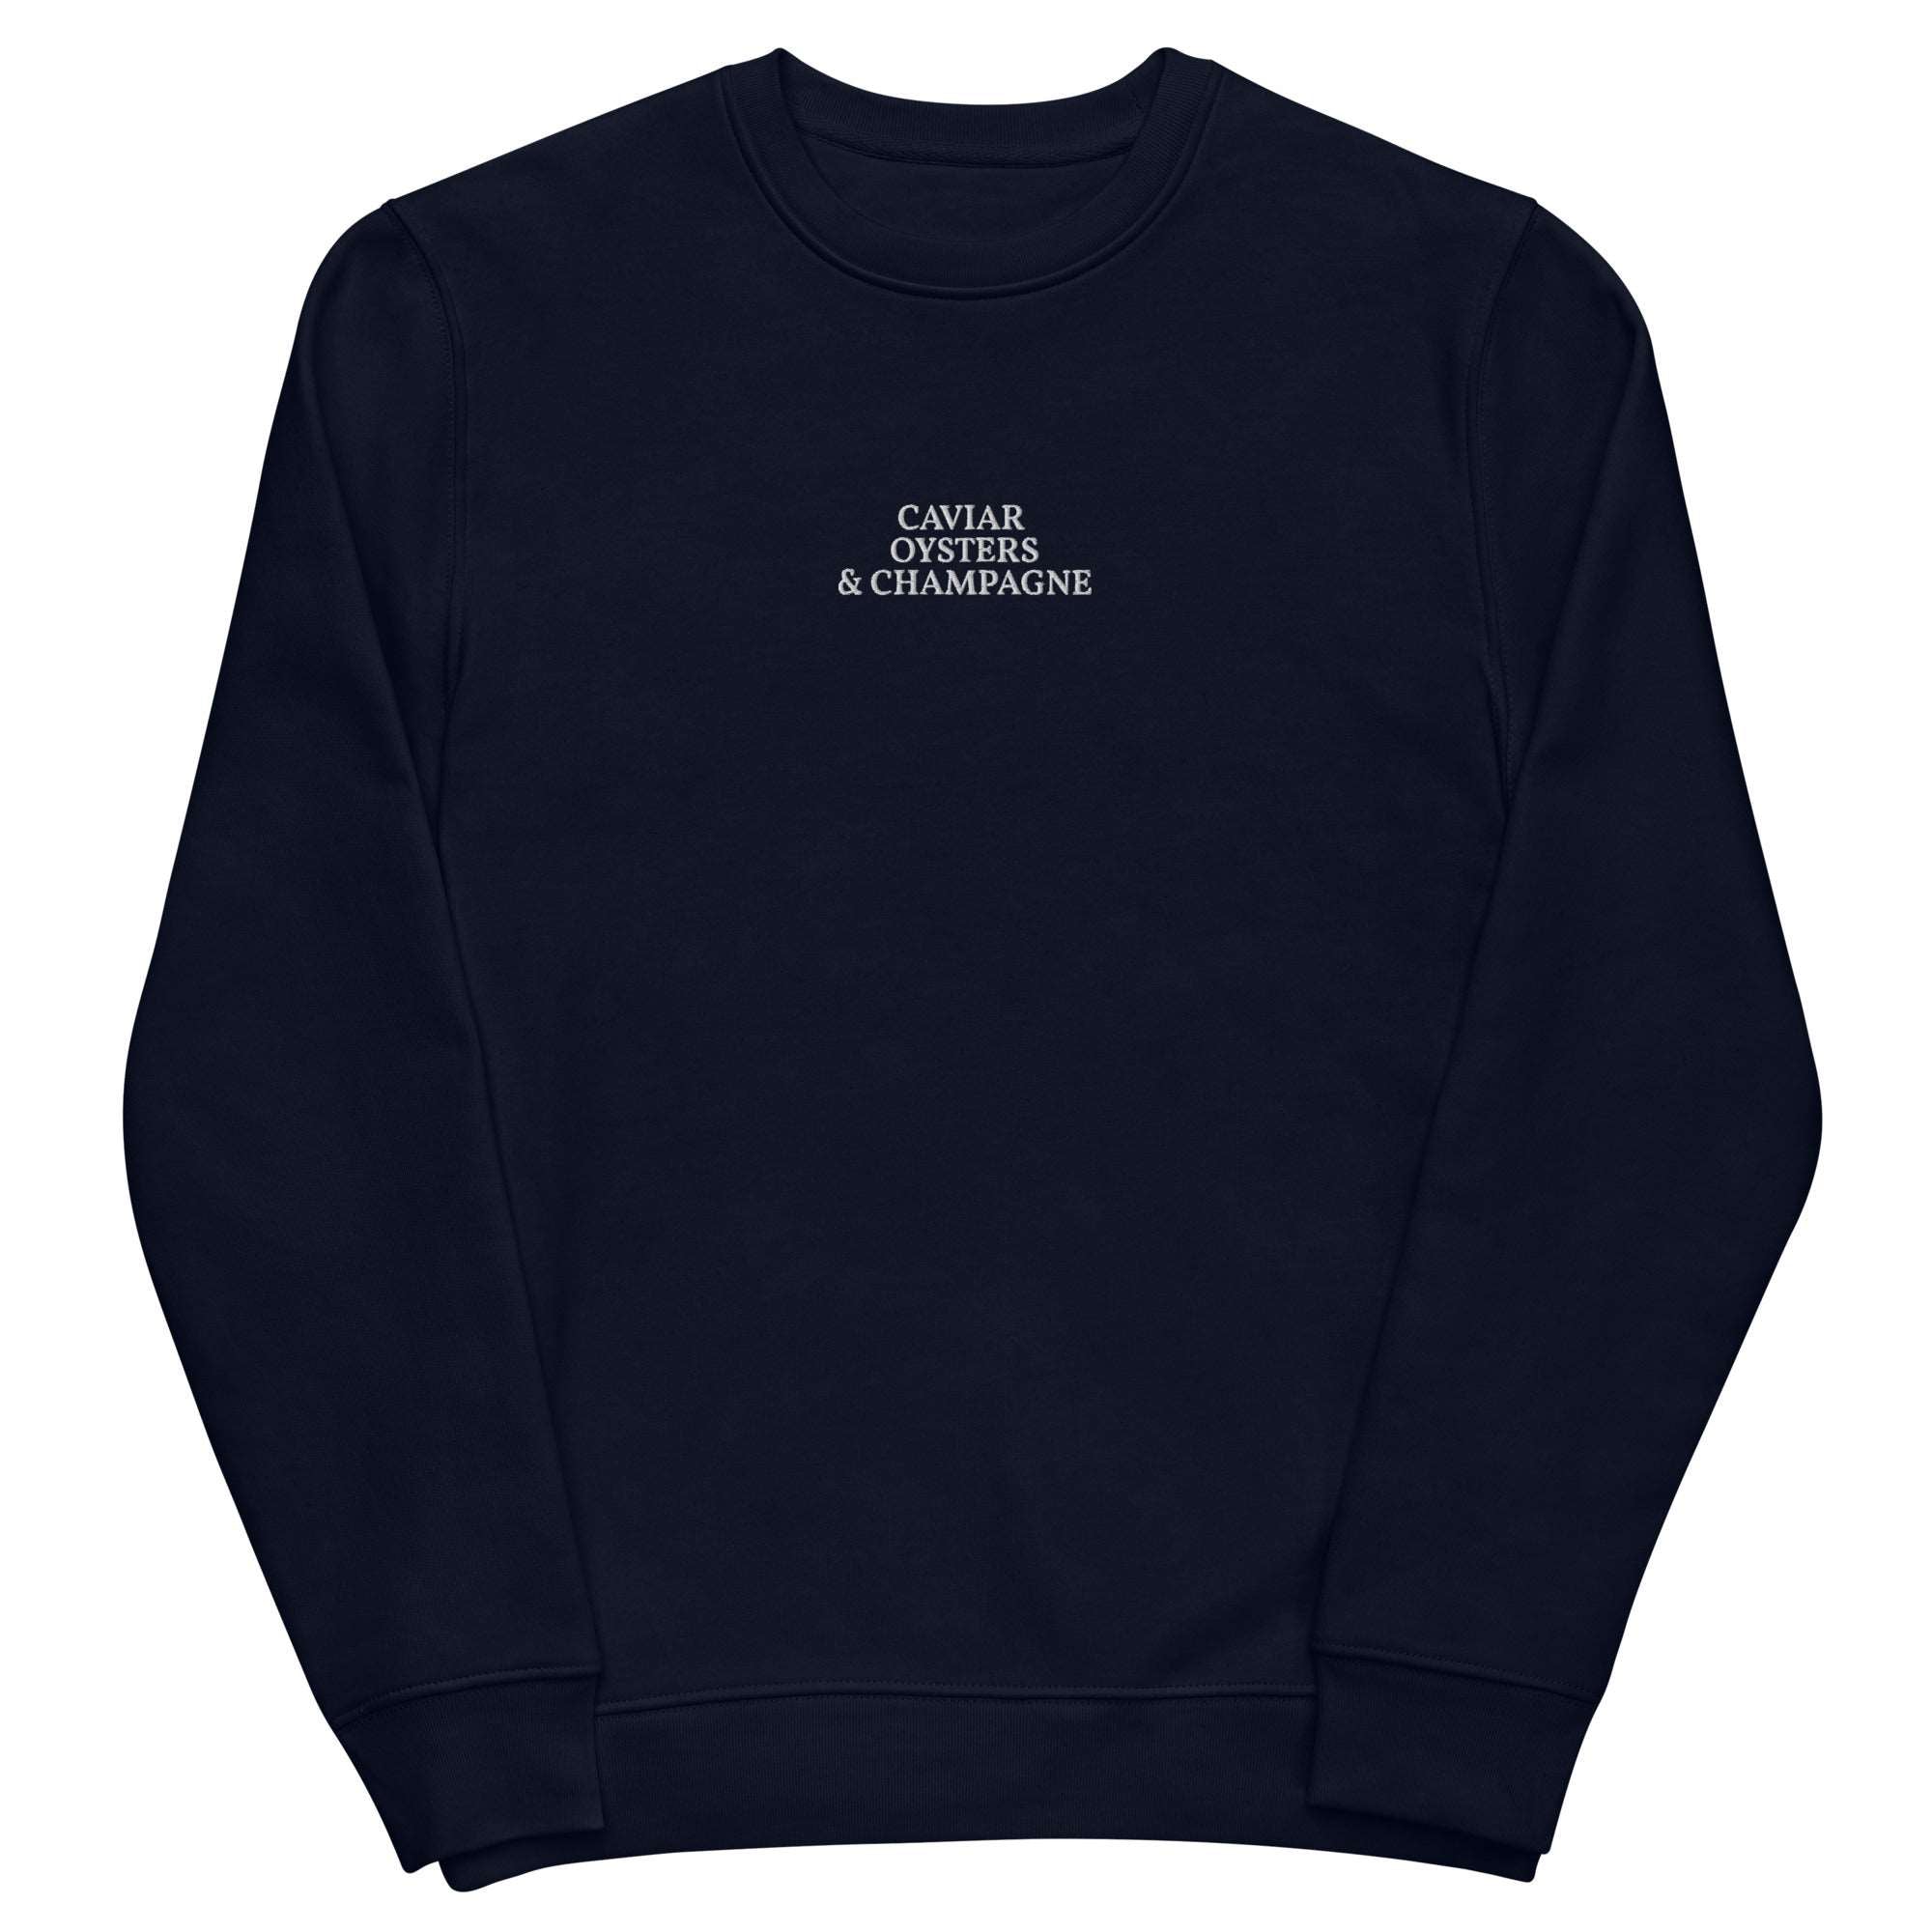 Caviar, Oysters & Champagne - Organic Embroidered Sweatshirt - The Refined Spirit